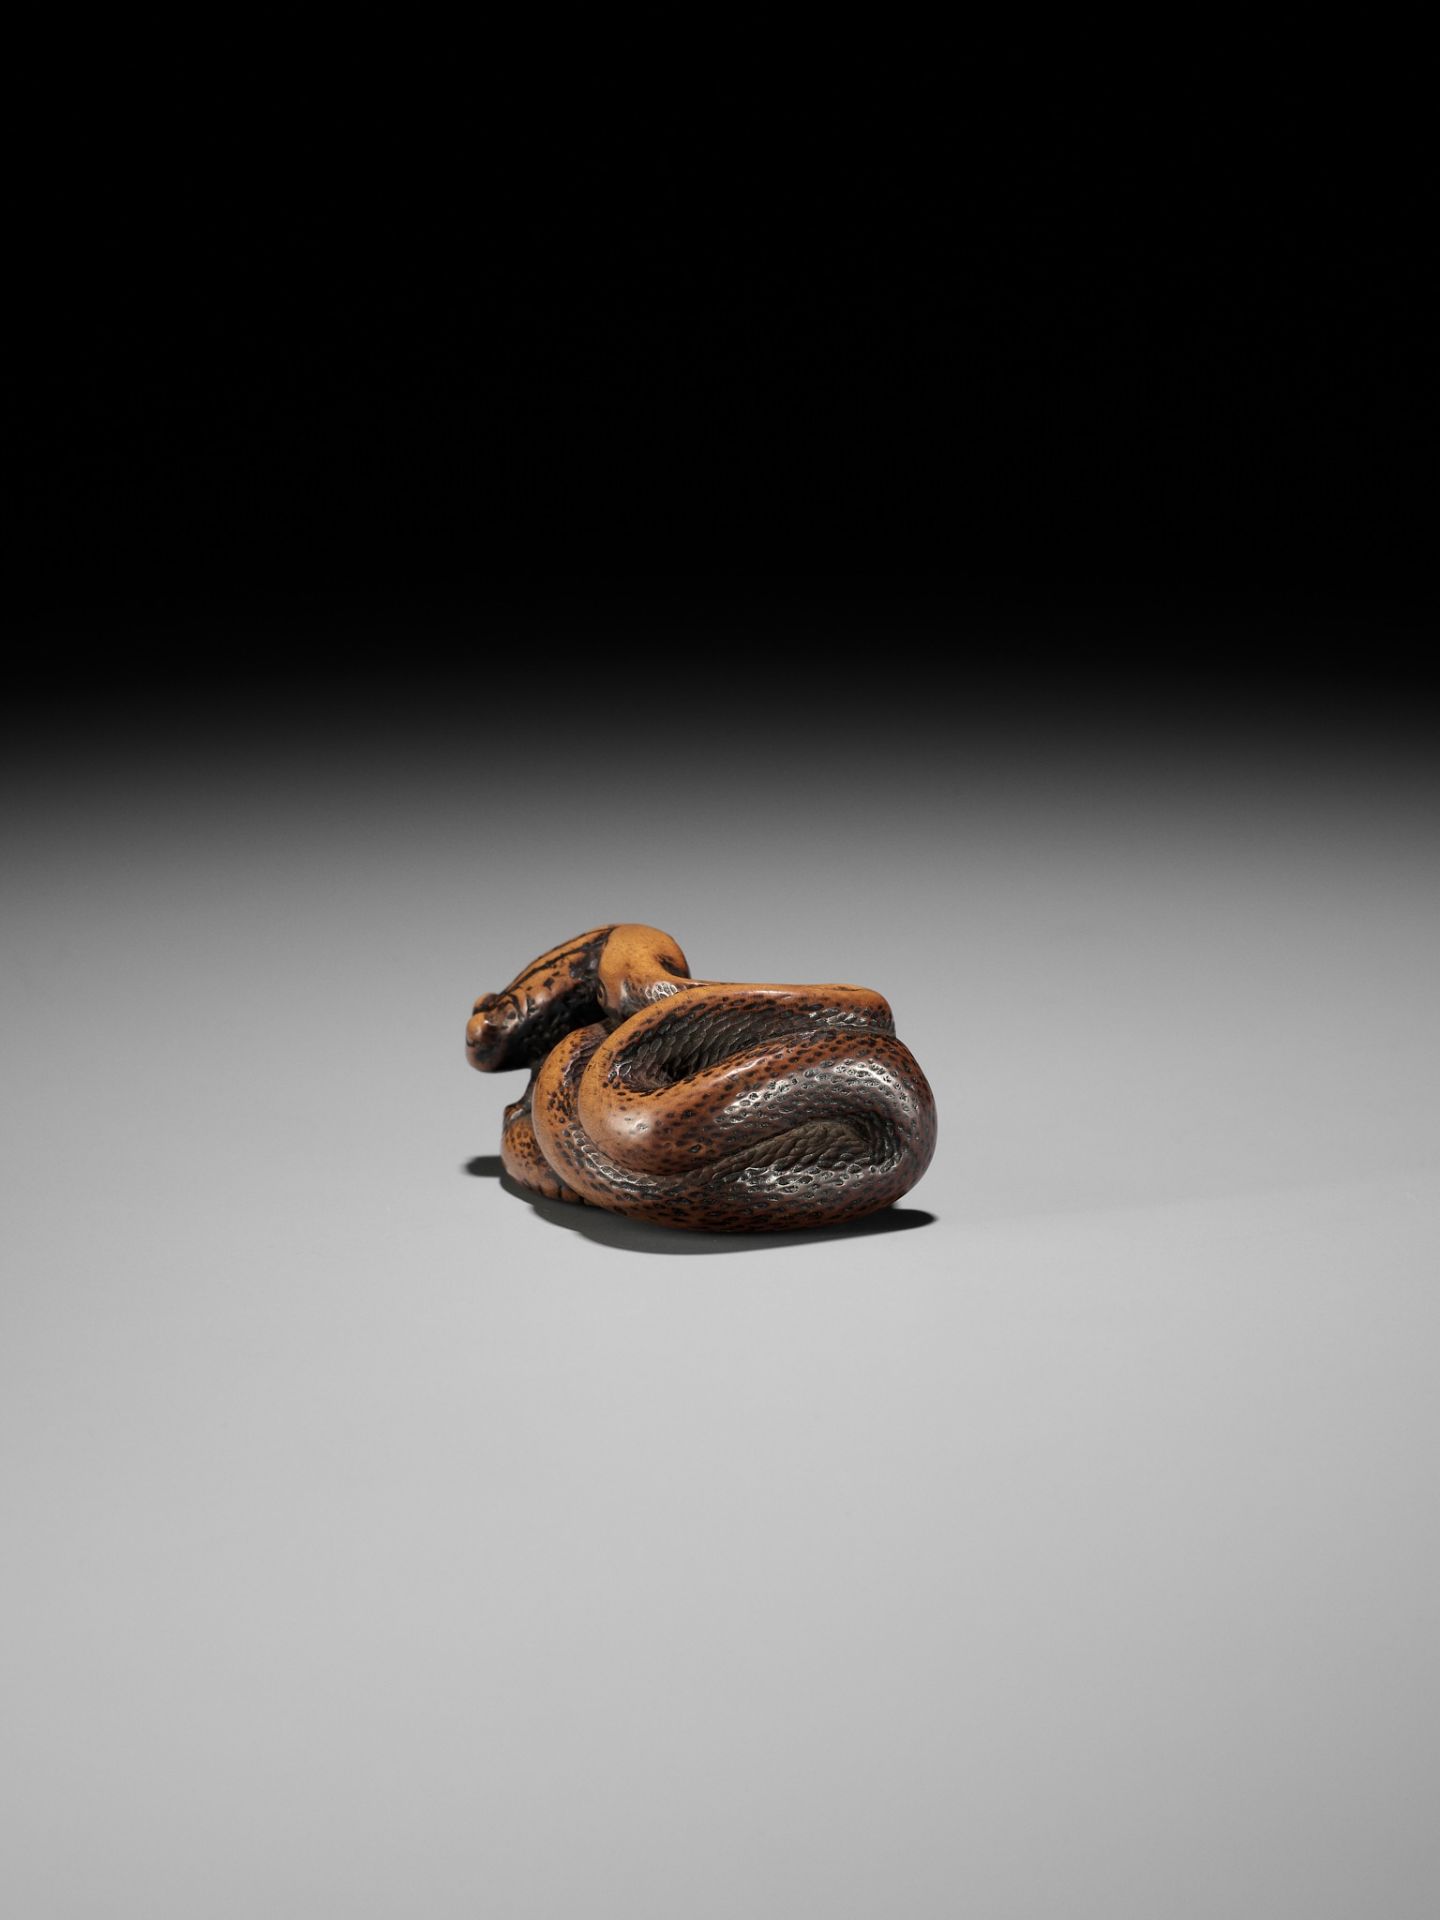 AN EARLY WOOD NETSUKE OF A SNAKE AND FROG - Image 8 of 12